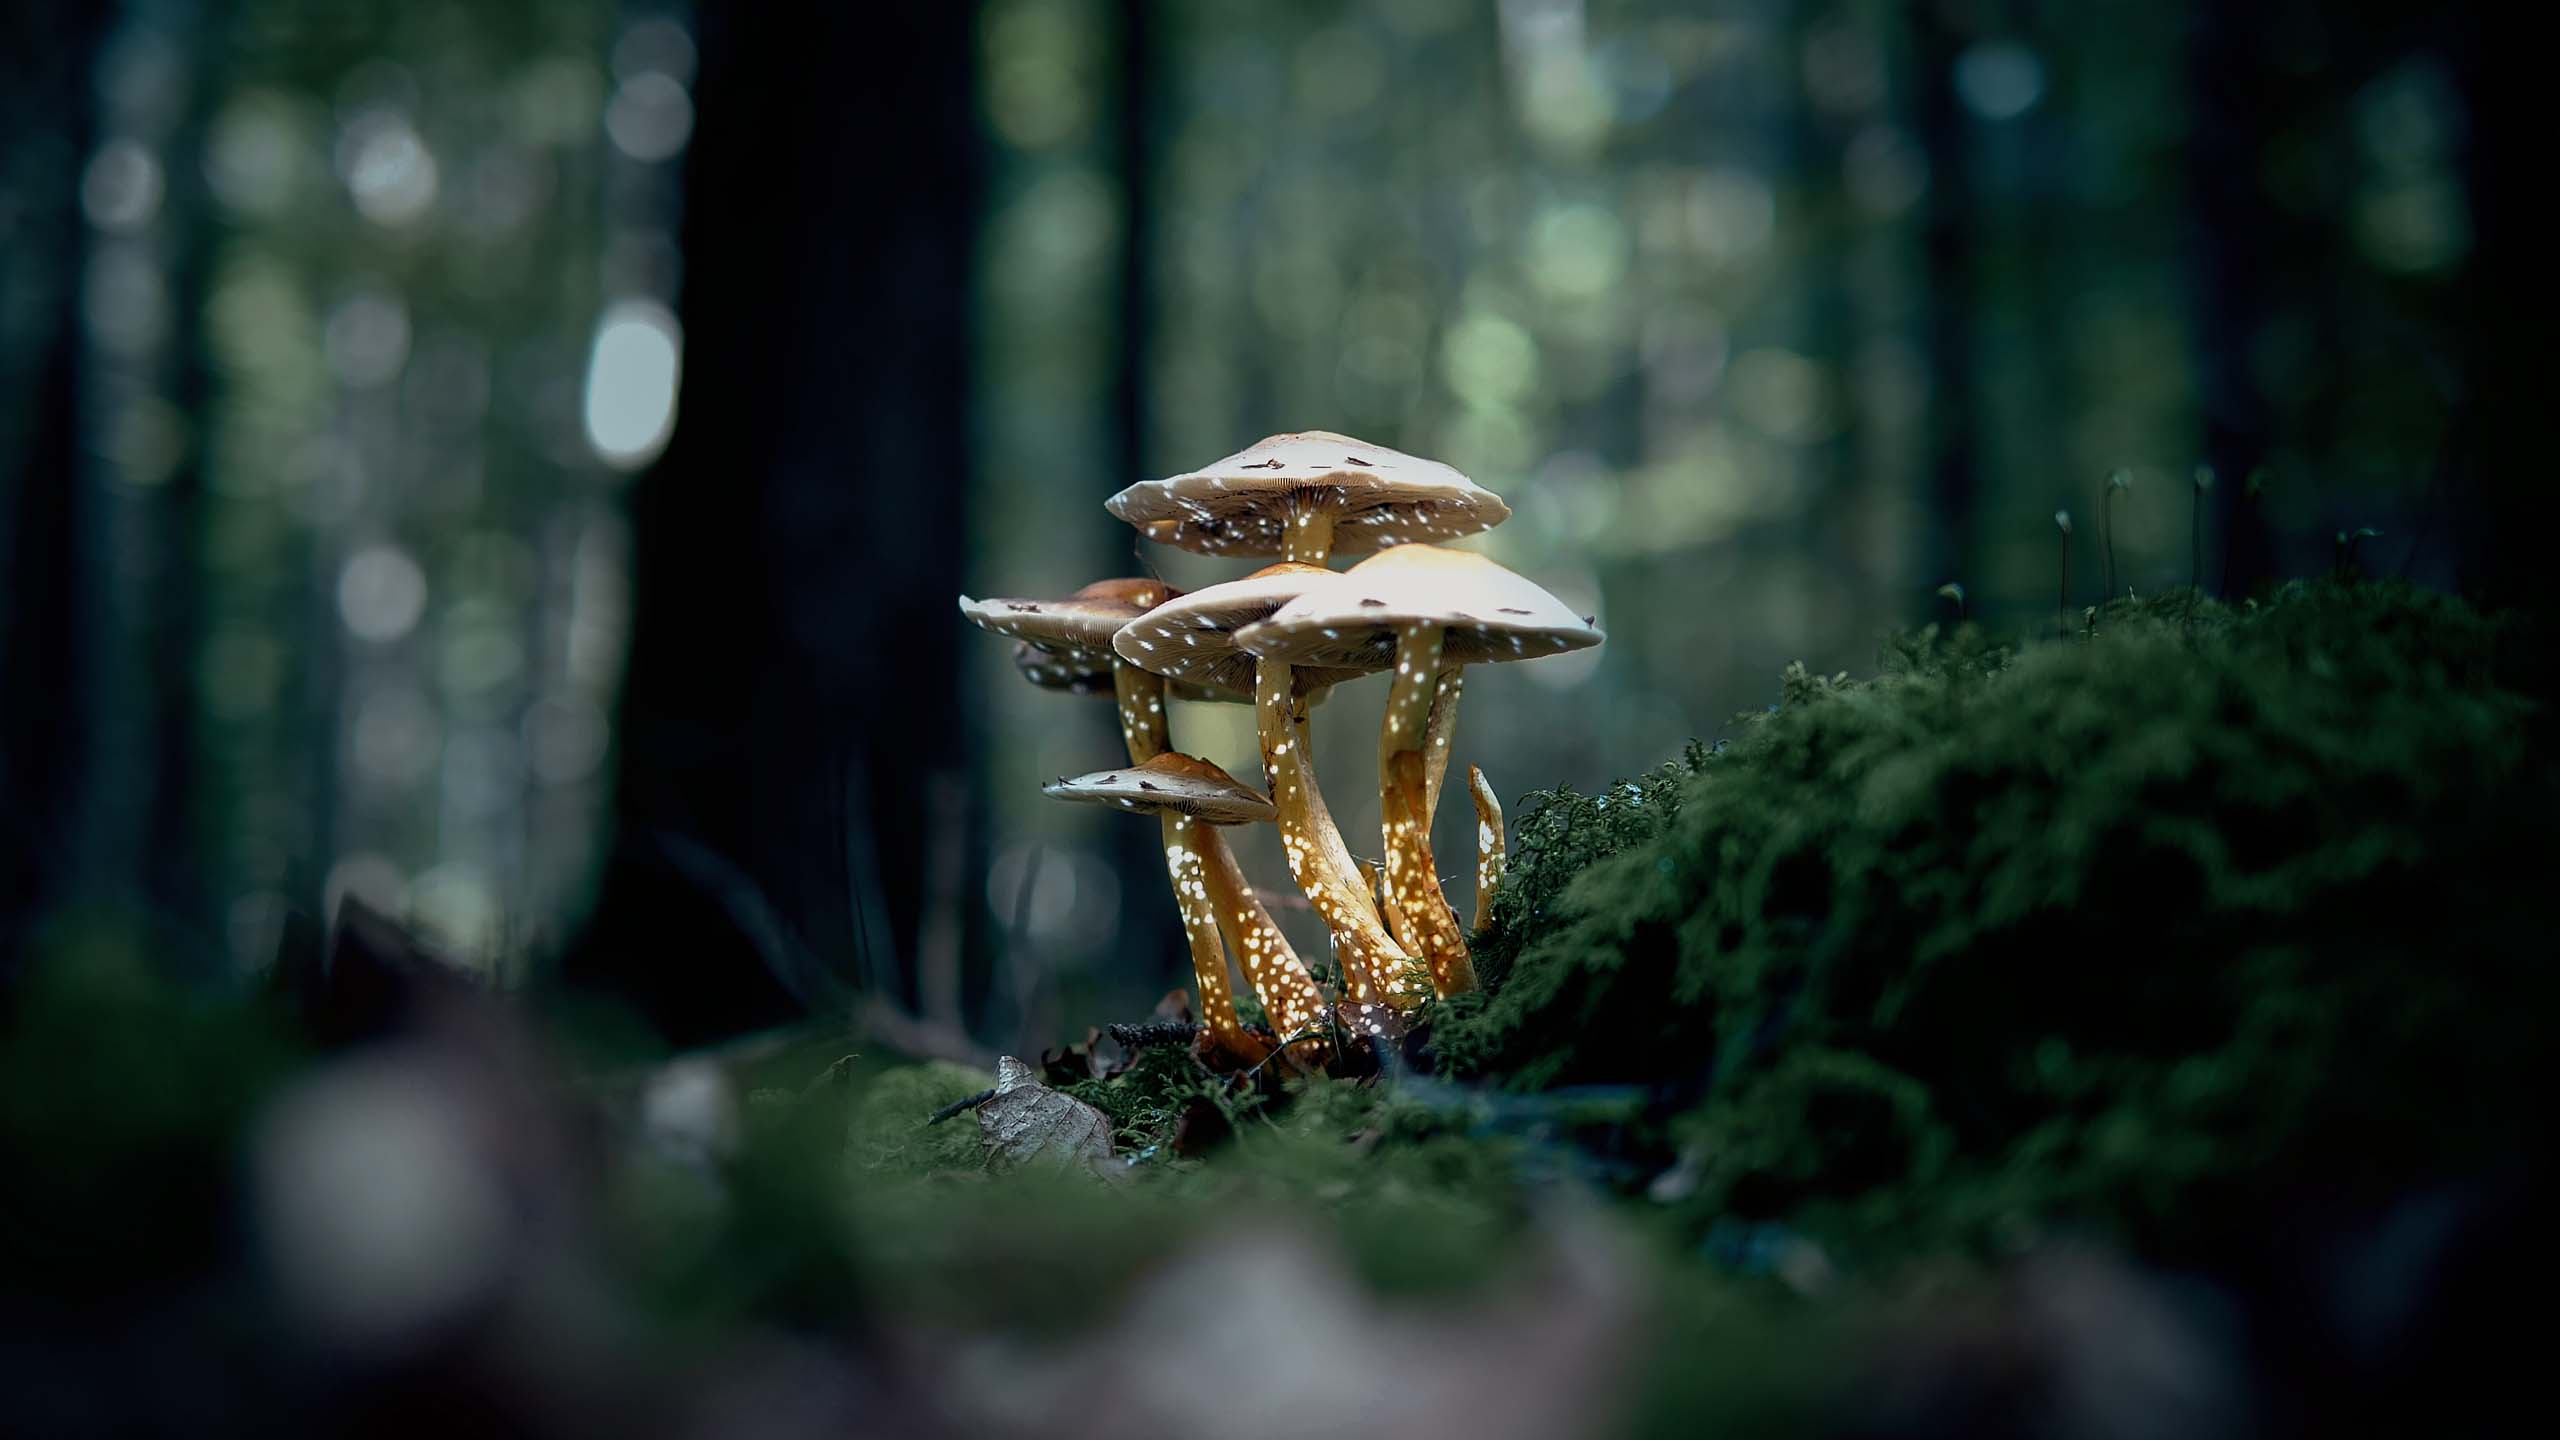 Art on a group of mushrooms in a forest with white dot visuals